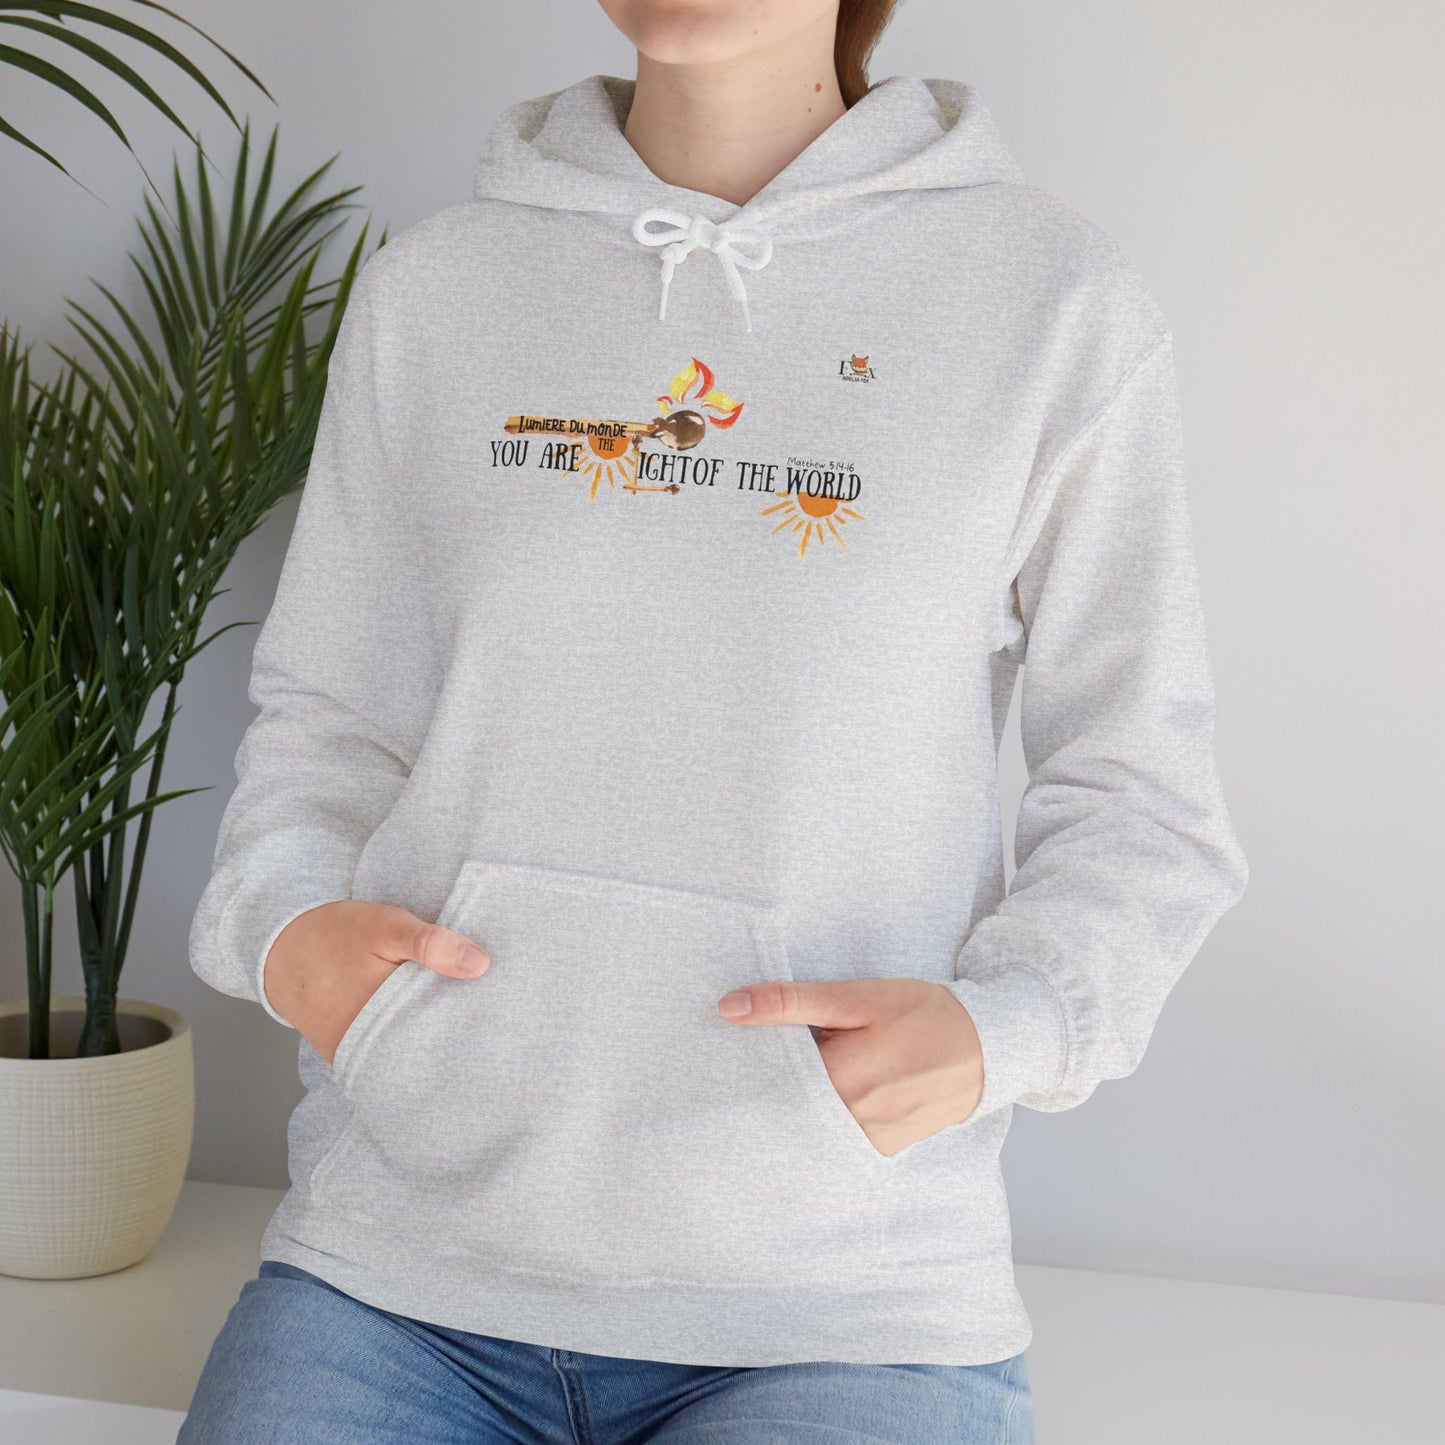 You are the light of the world [matches]-  Hoodie Sweatshirt